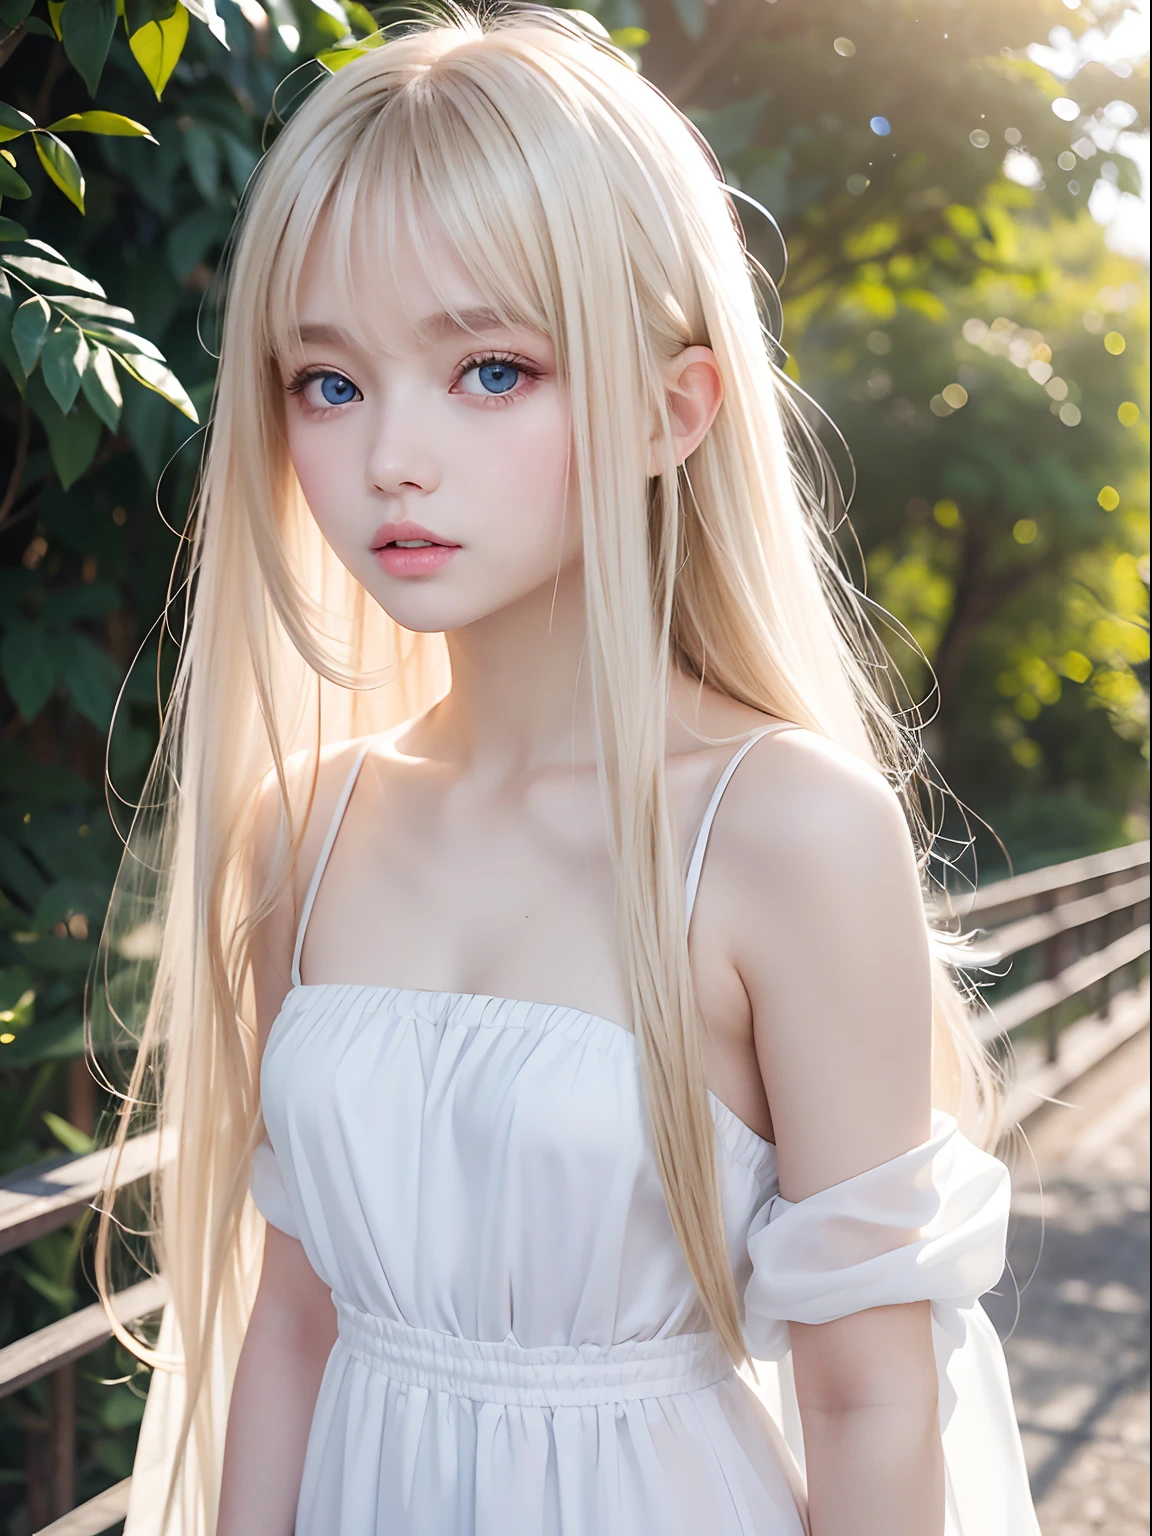 Transparent white glossy skin、Wind hair gets in the way in front of cute face、18 year old cute sexy little beautiful face、Beautiful straight hair that shines、Big、Very beautiful light blue eyes that shine、Long silky bangs covering cute eyes, Sexy face hiding hair super long hair sexy cute young woman long natural blonde shiny bright hair